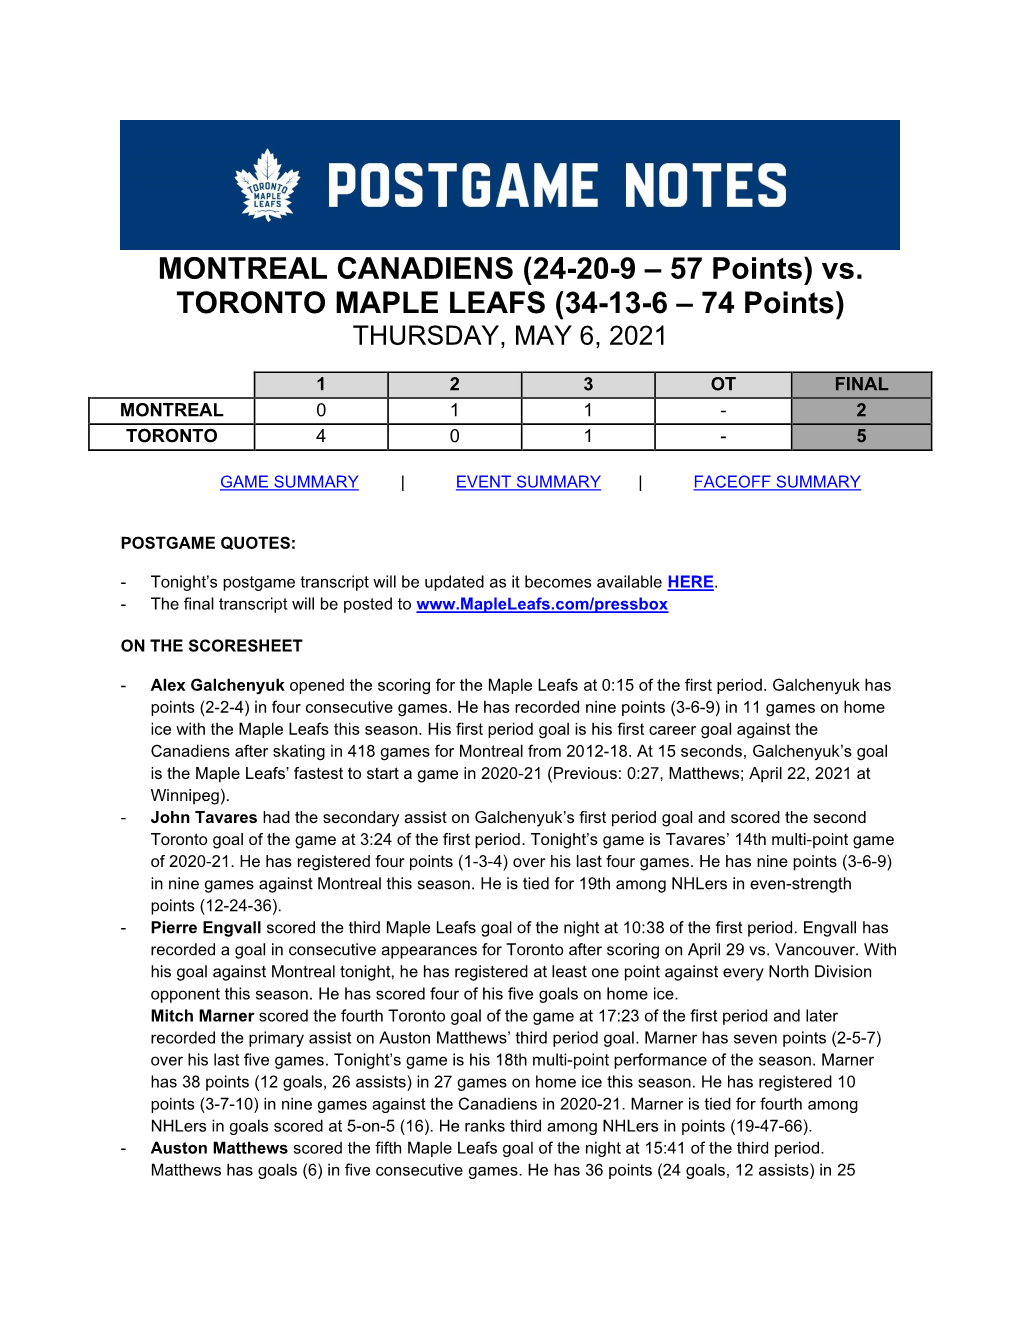 MONTREAL CANADIENS (24-20-9 – 57 Points) Vs. TORONTO MAPLE LEAFS (34-13-6 – 74 Points) THURSDAY, MAY 6, 2021